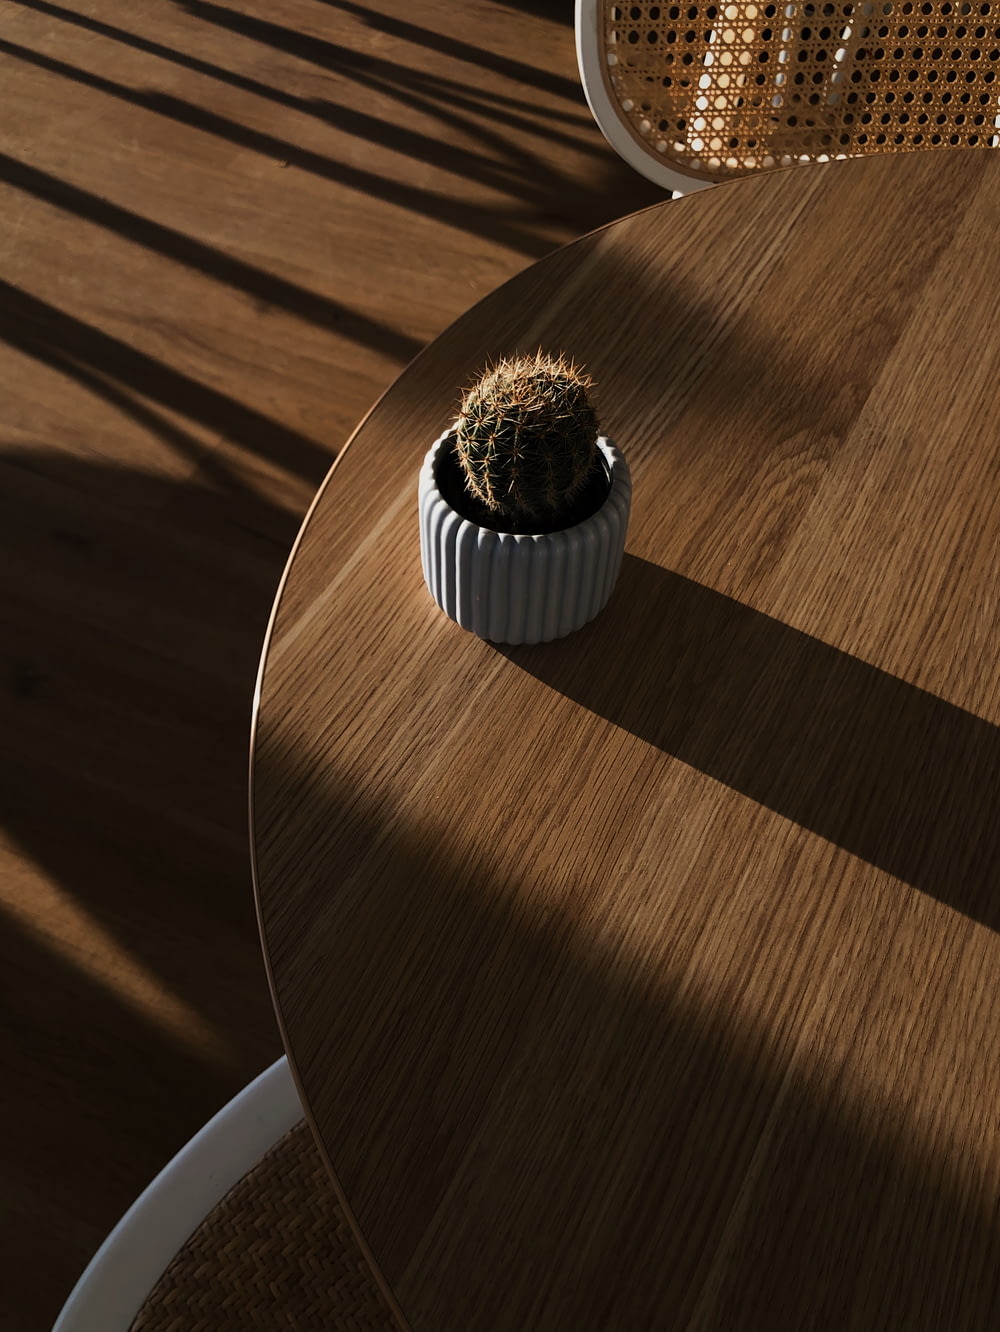 white and black round ornament on brown wooden table